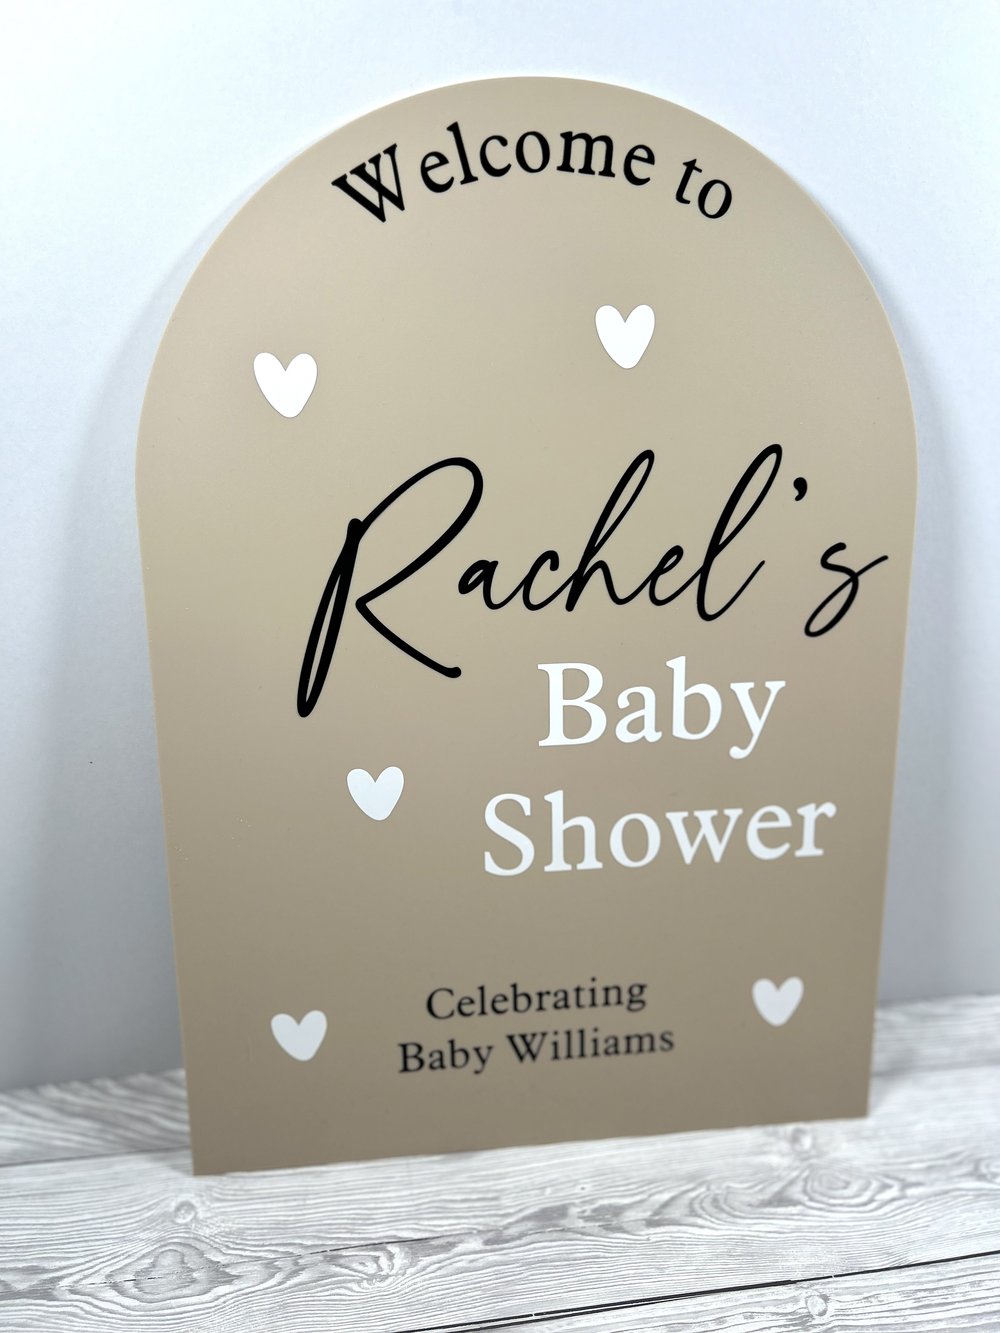 Baby Shower Signs, Acrylic Baby Shower Sign, Baby Shower Welcome Sign